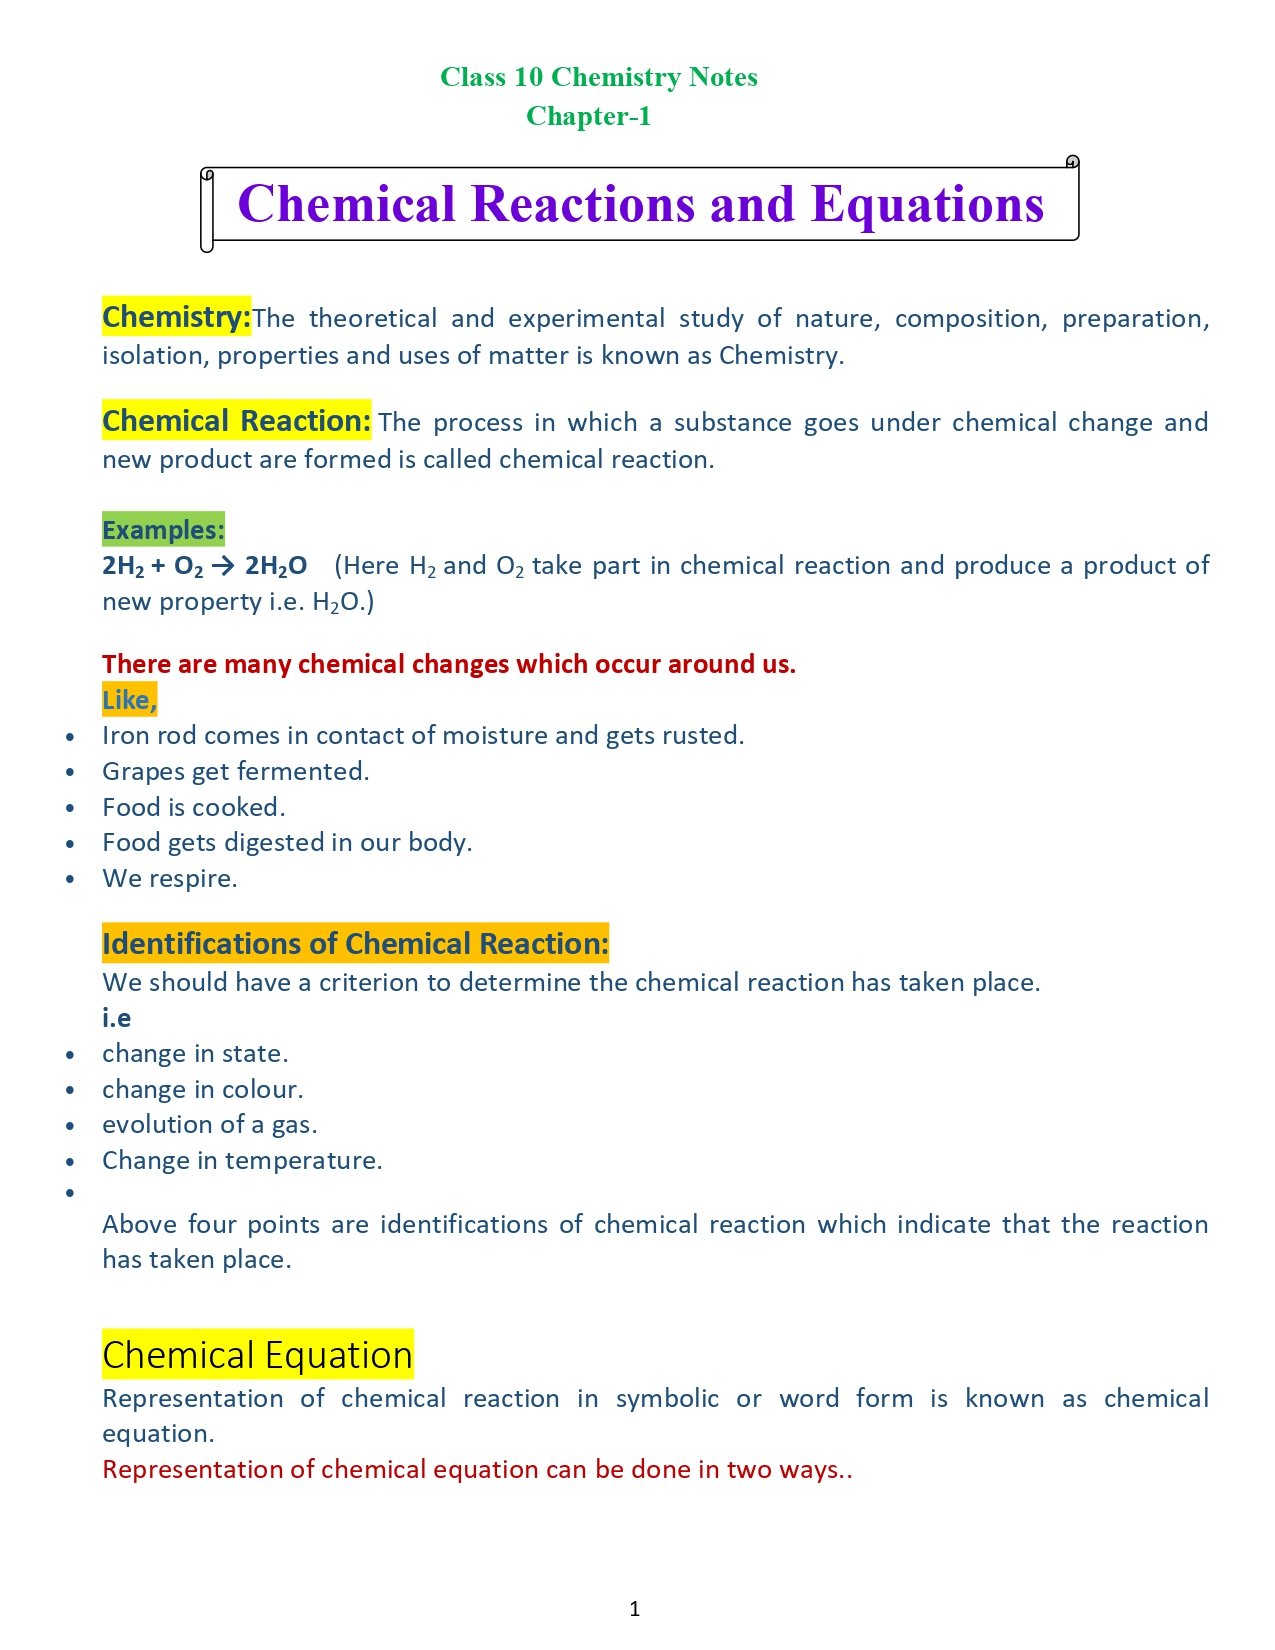 Class 10 Science Notes Chapter 1 Chemical Reactions And Equations Apex Classes